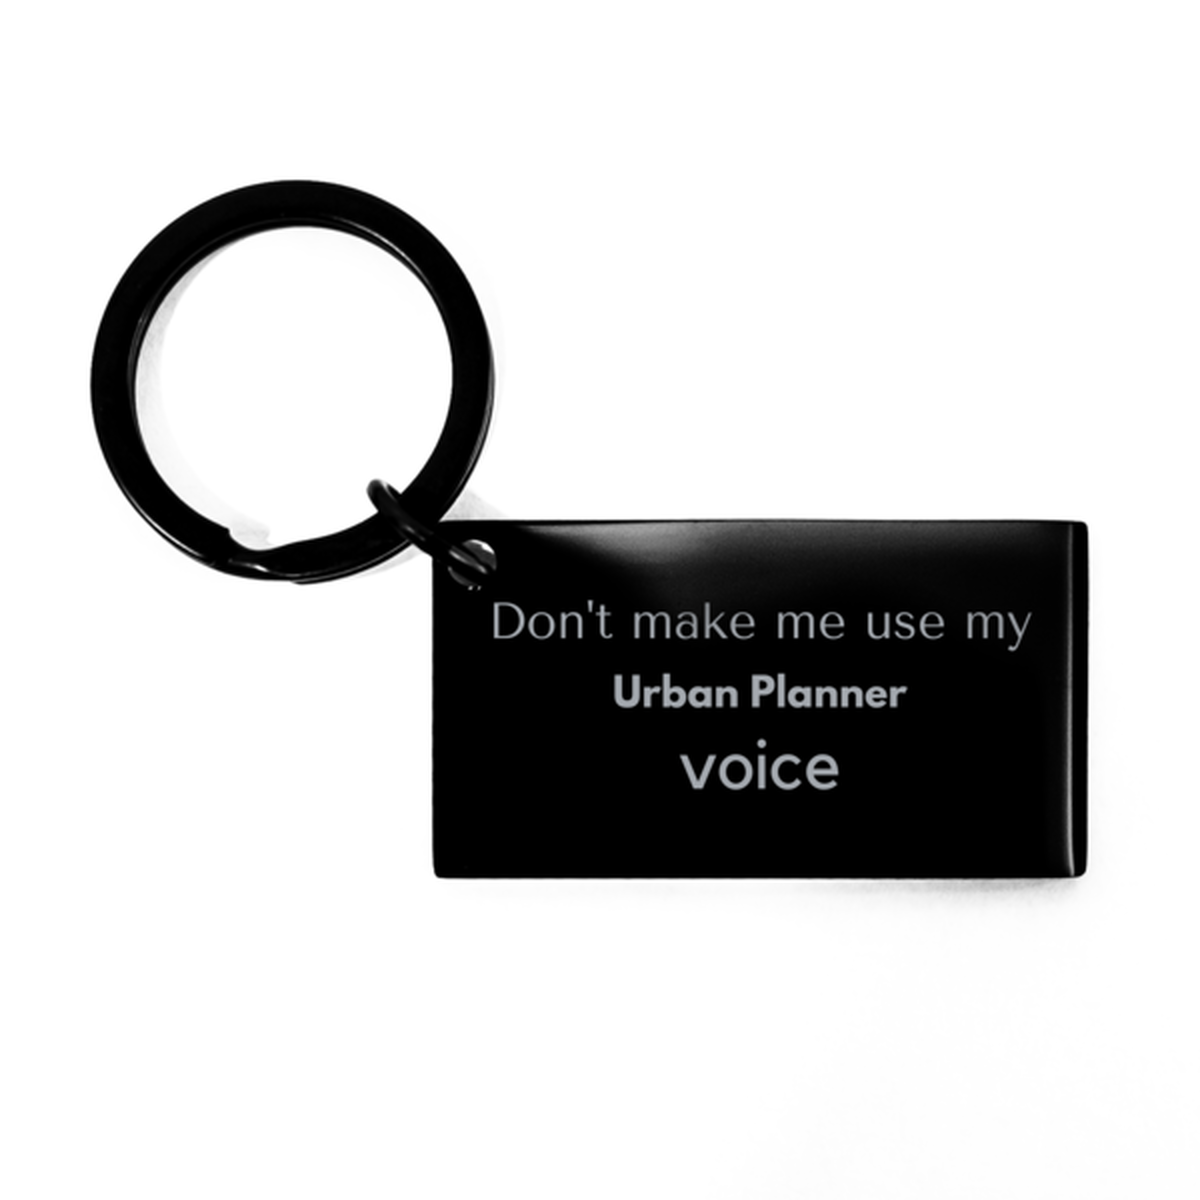 Don't make me use my Urban Planner voice, Sarcasm Urban Planner Gifts, Christmas Urban Planner Keychain Birthday Unique Gifts For Urban Planner Coworkers, Men, Women, Colleague, Friends